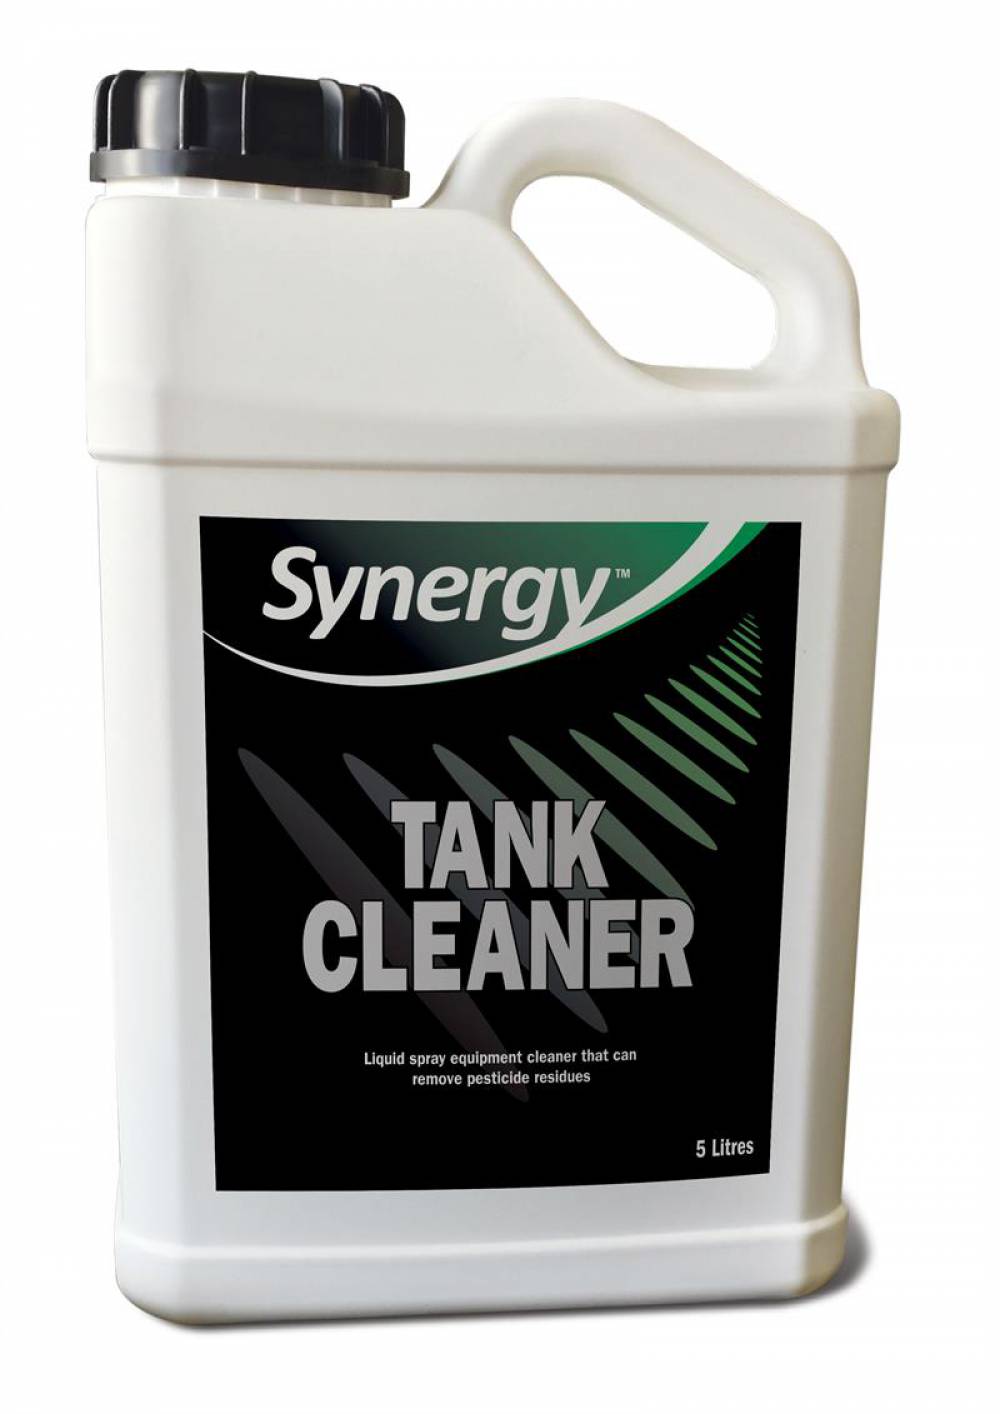 Synergy™ Tank Cleaner